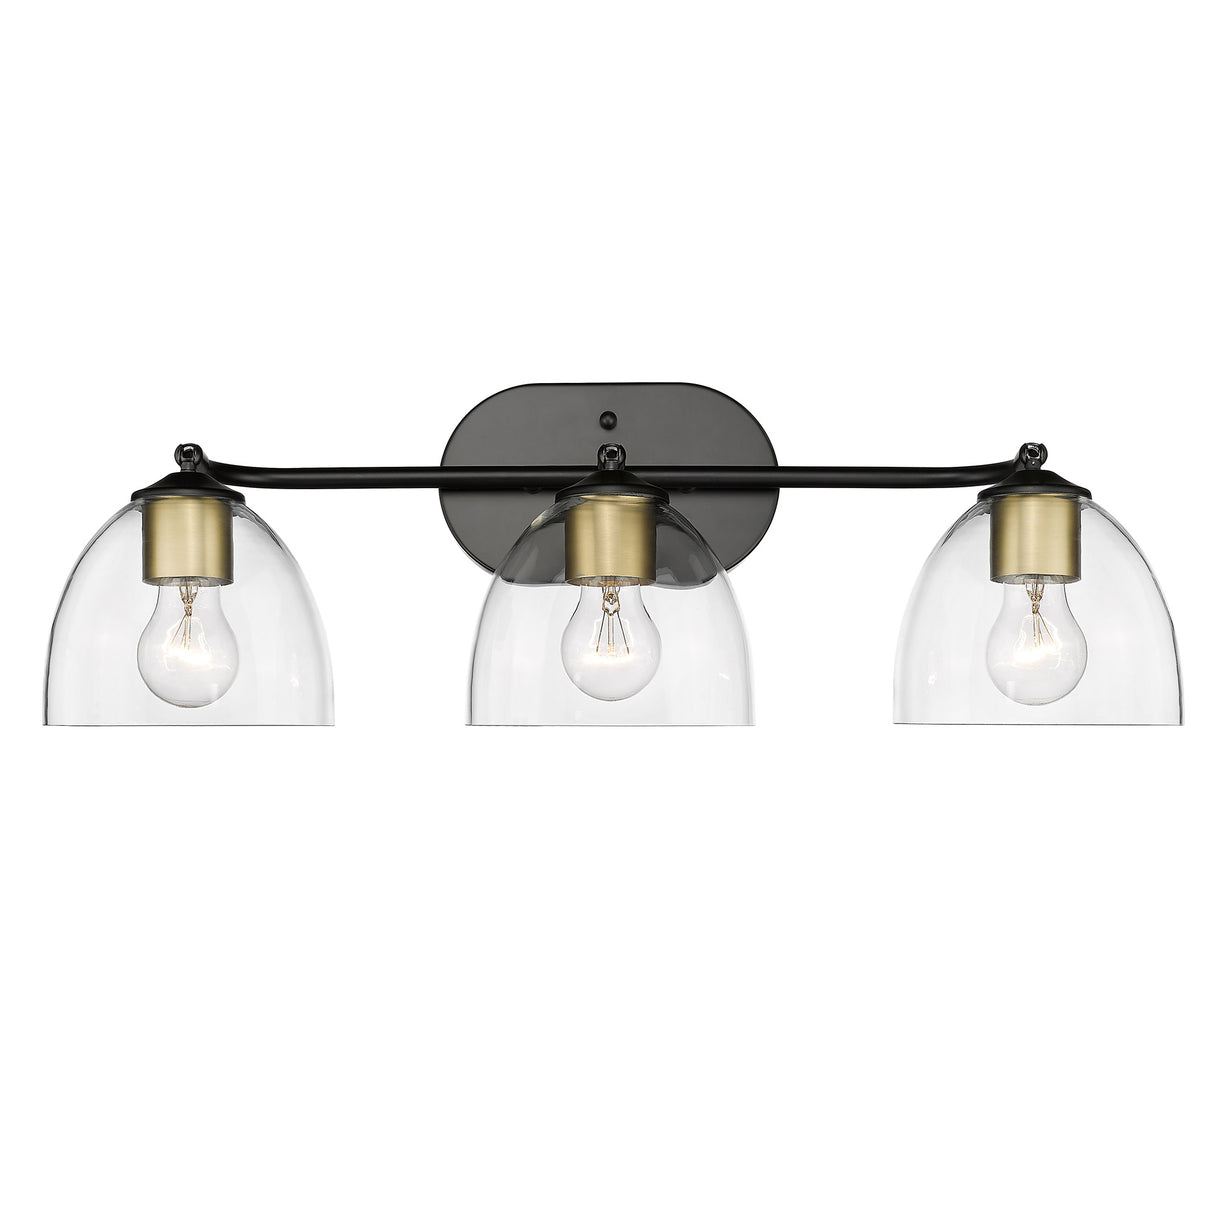 Roxie 3 Light Semi-Flush in Matte Black with Brushed Champagne Bronze Accents and Clear Glass Shade